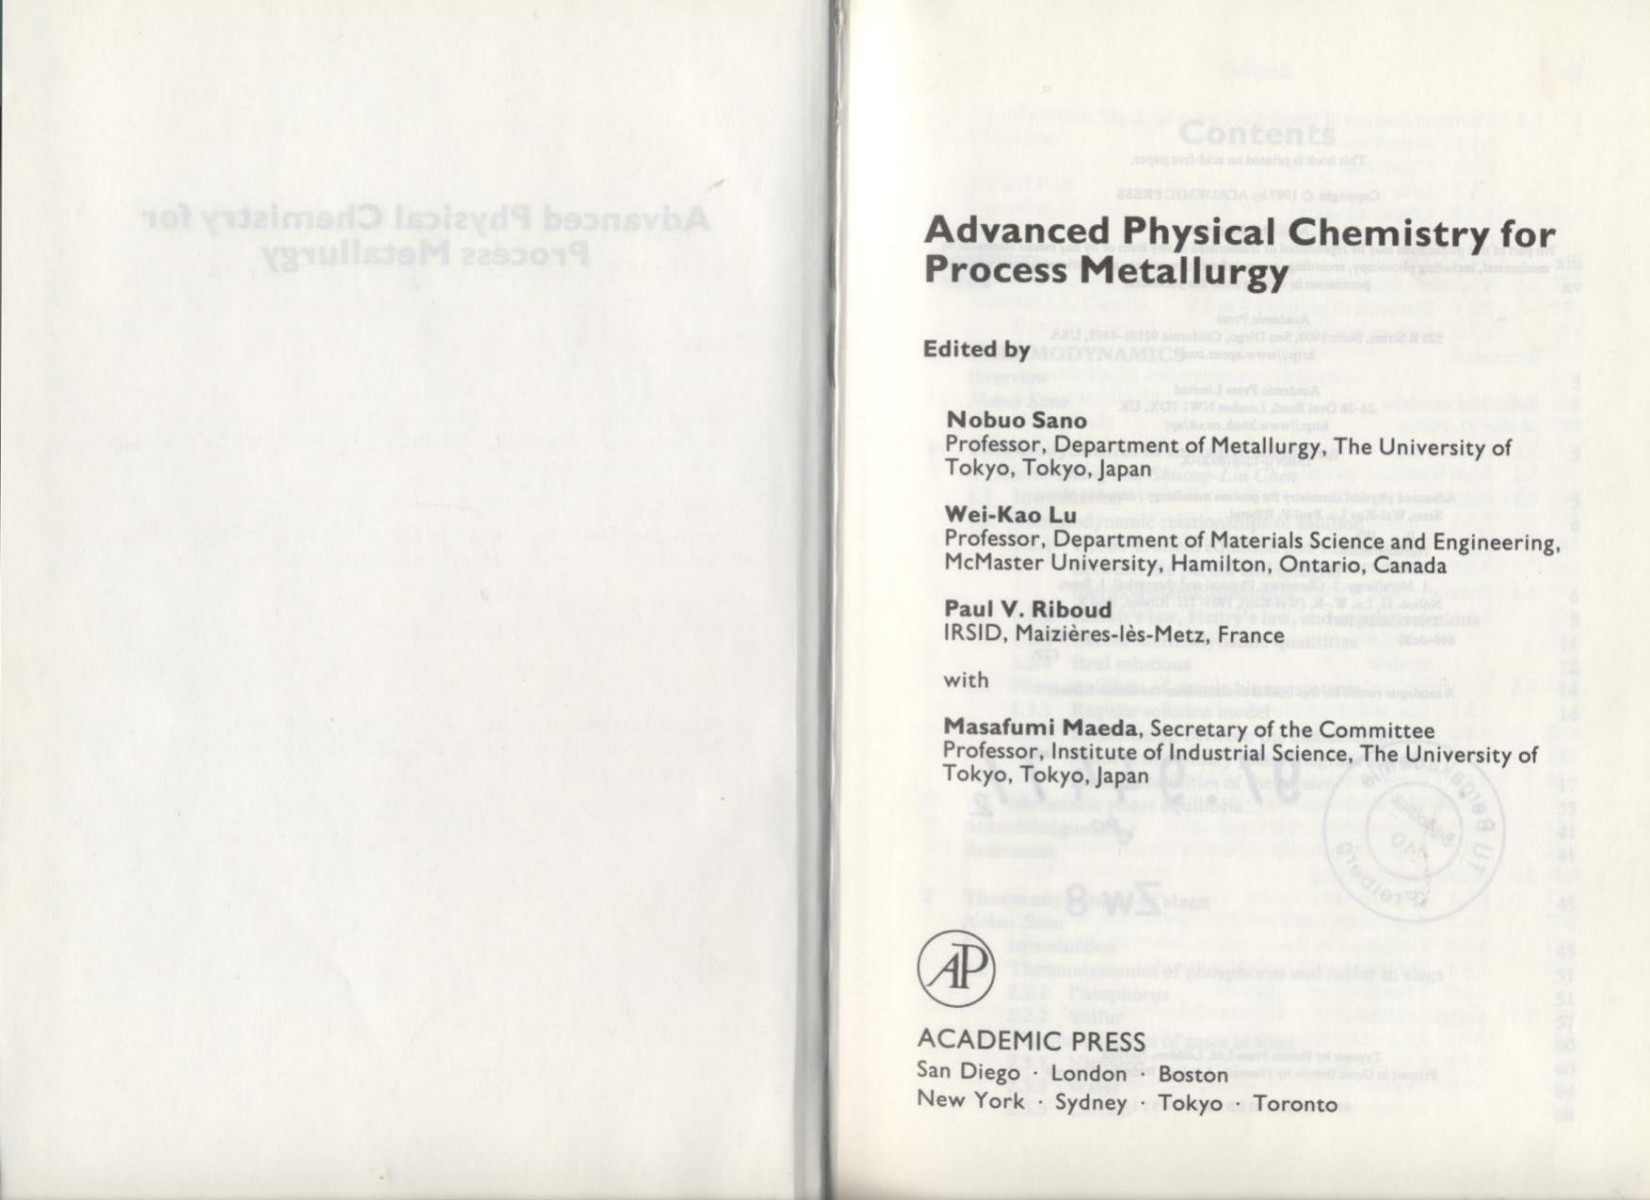 Advanced Physical Chemistry for Process Metallurgy 2016